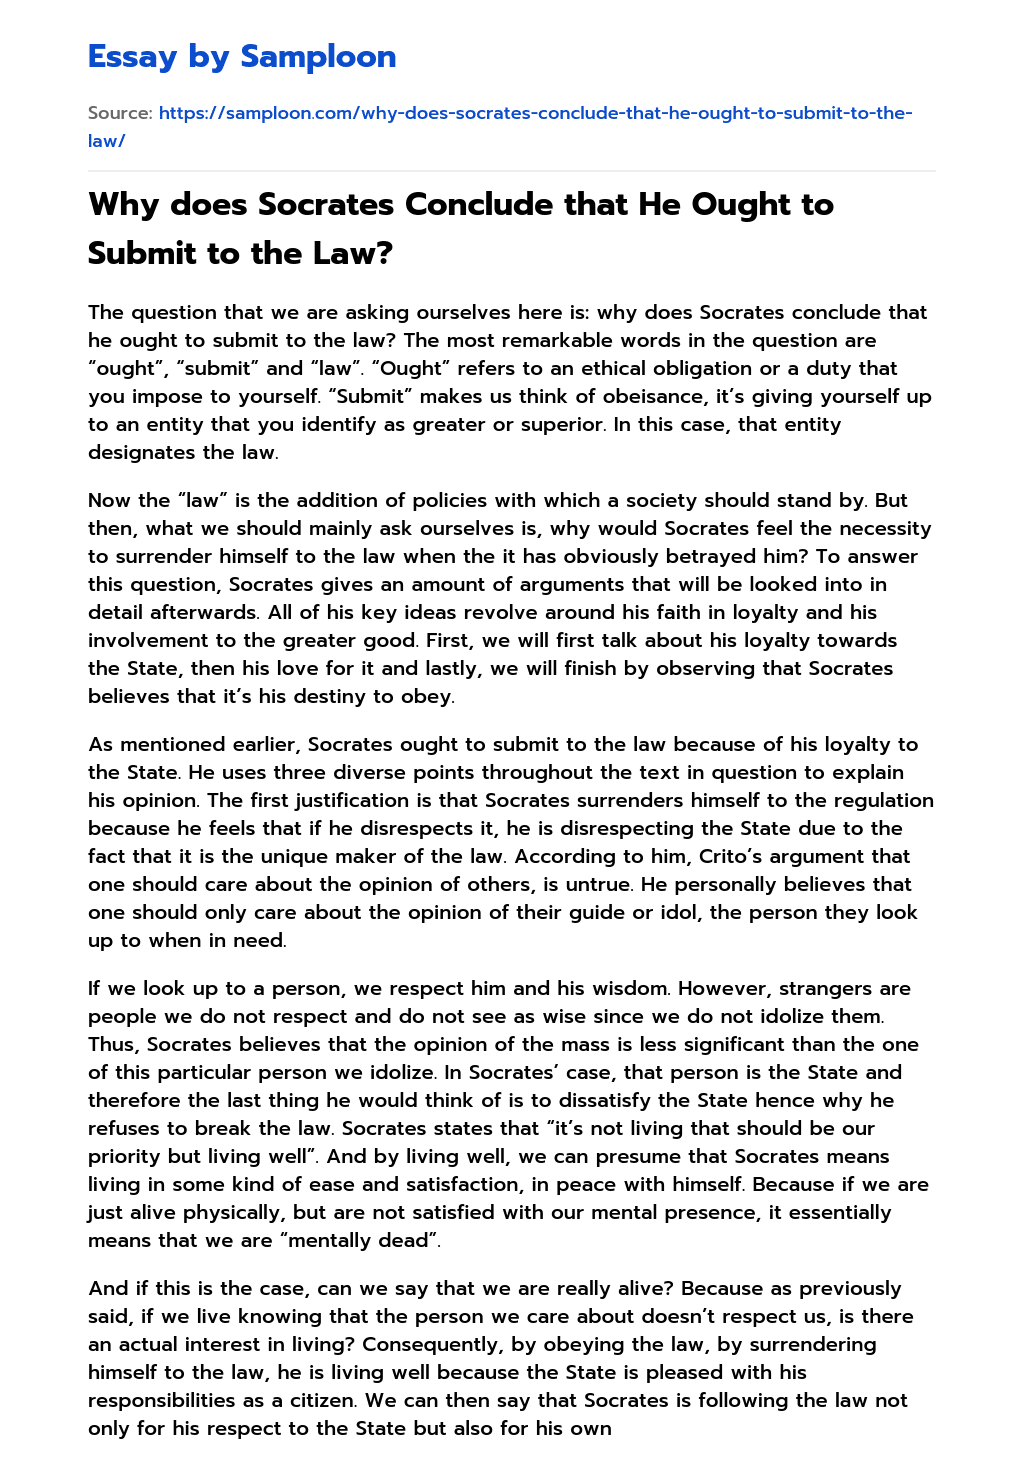 Why does Socrates Conclude that He Ought to Submit to the Law? essay